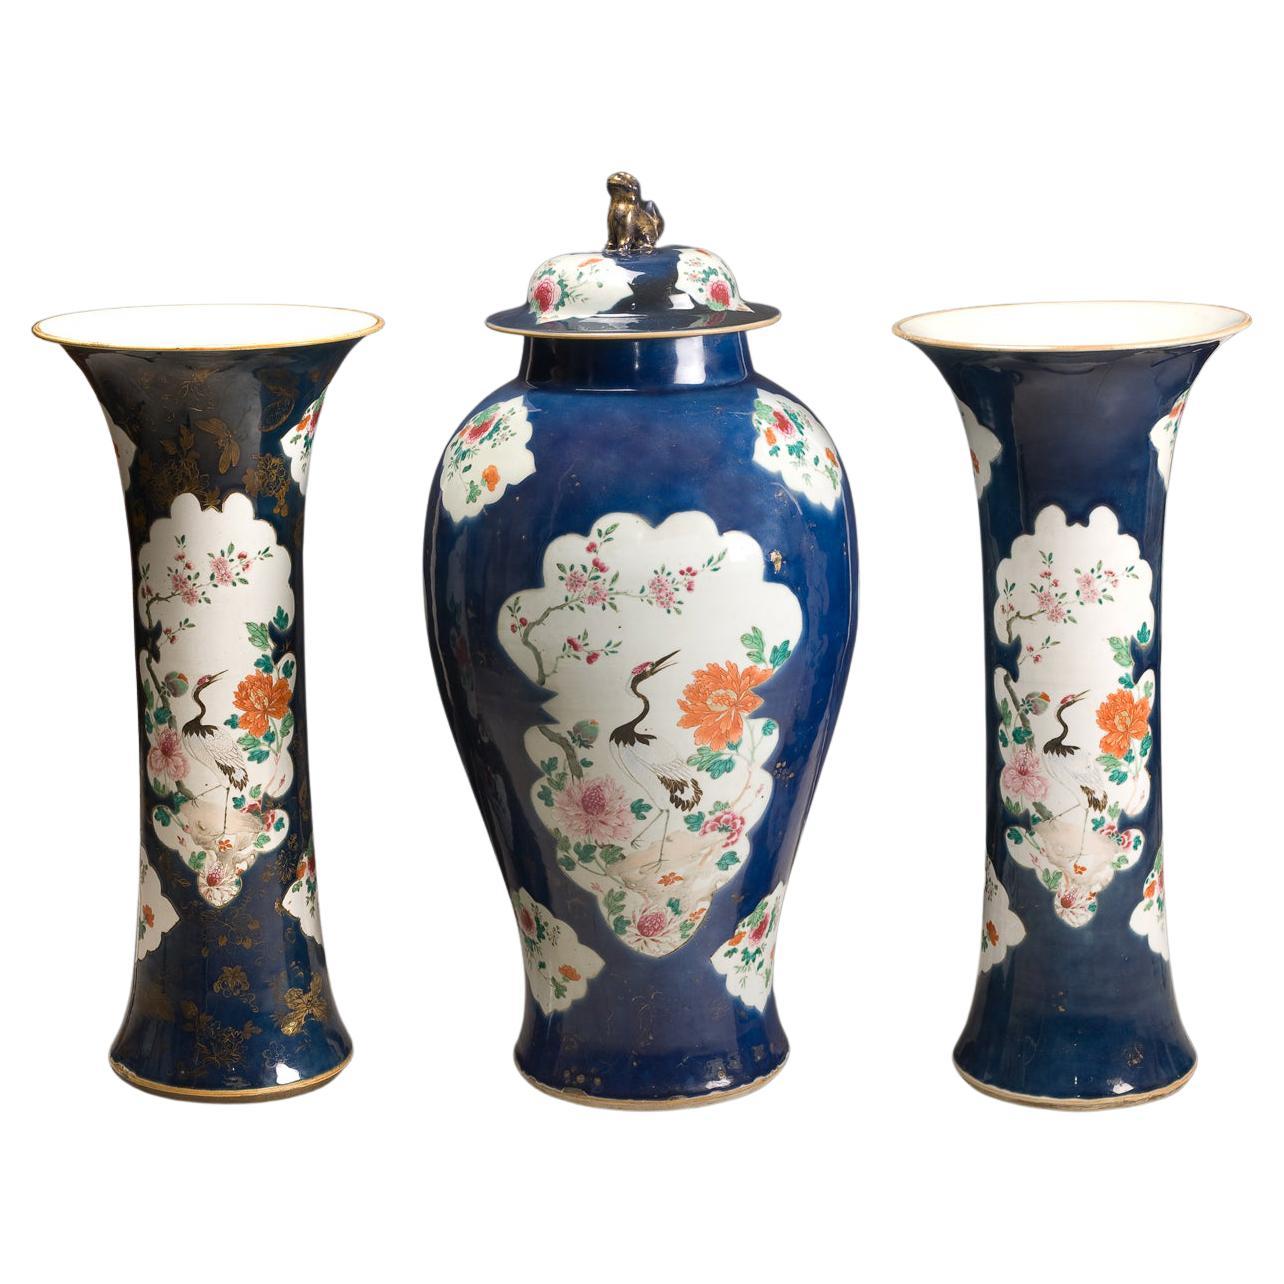 Set of Two Trumpet Vases and One Covered Jar, Kieng Lung Period '1735-1795' For Sale